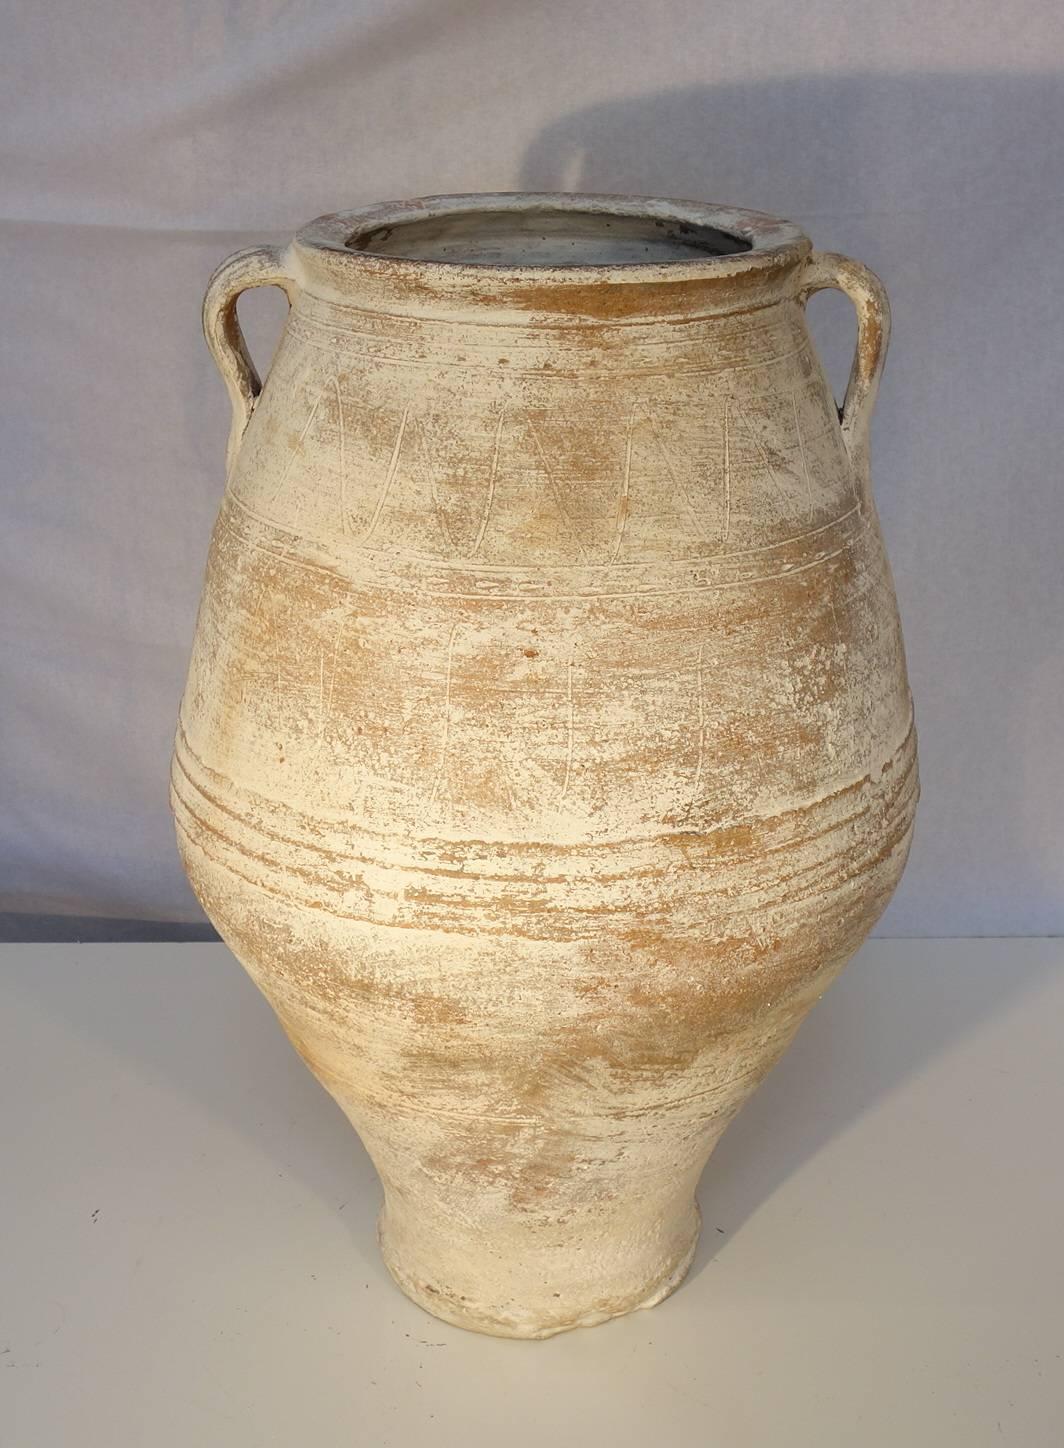 Simple line 19th century Greek water Ampora wonderful white lime patina, once used as storage and shipping jars for water. Tapered shape toward the bottom with geometric and midline scoring. Heavy white patina.
Pair of jars, similar in size and